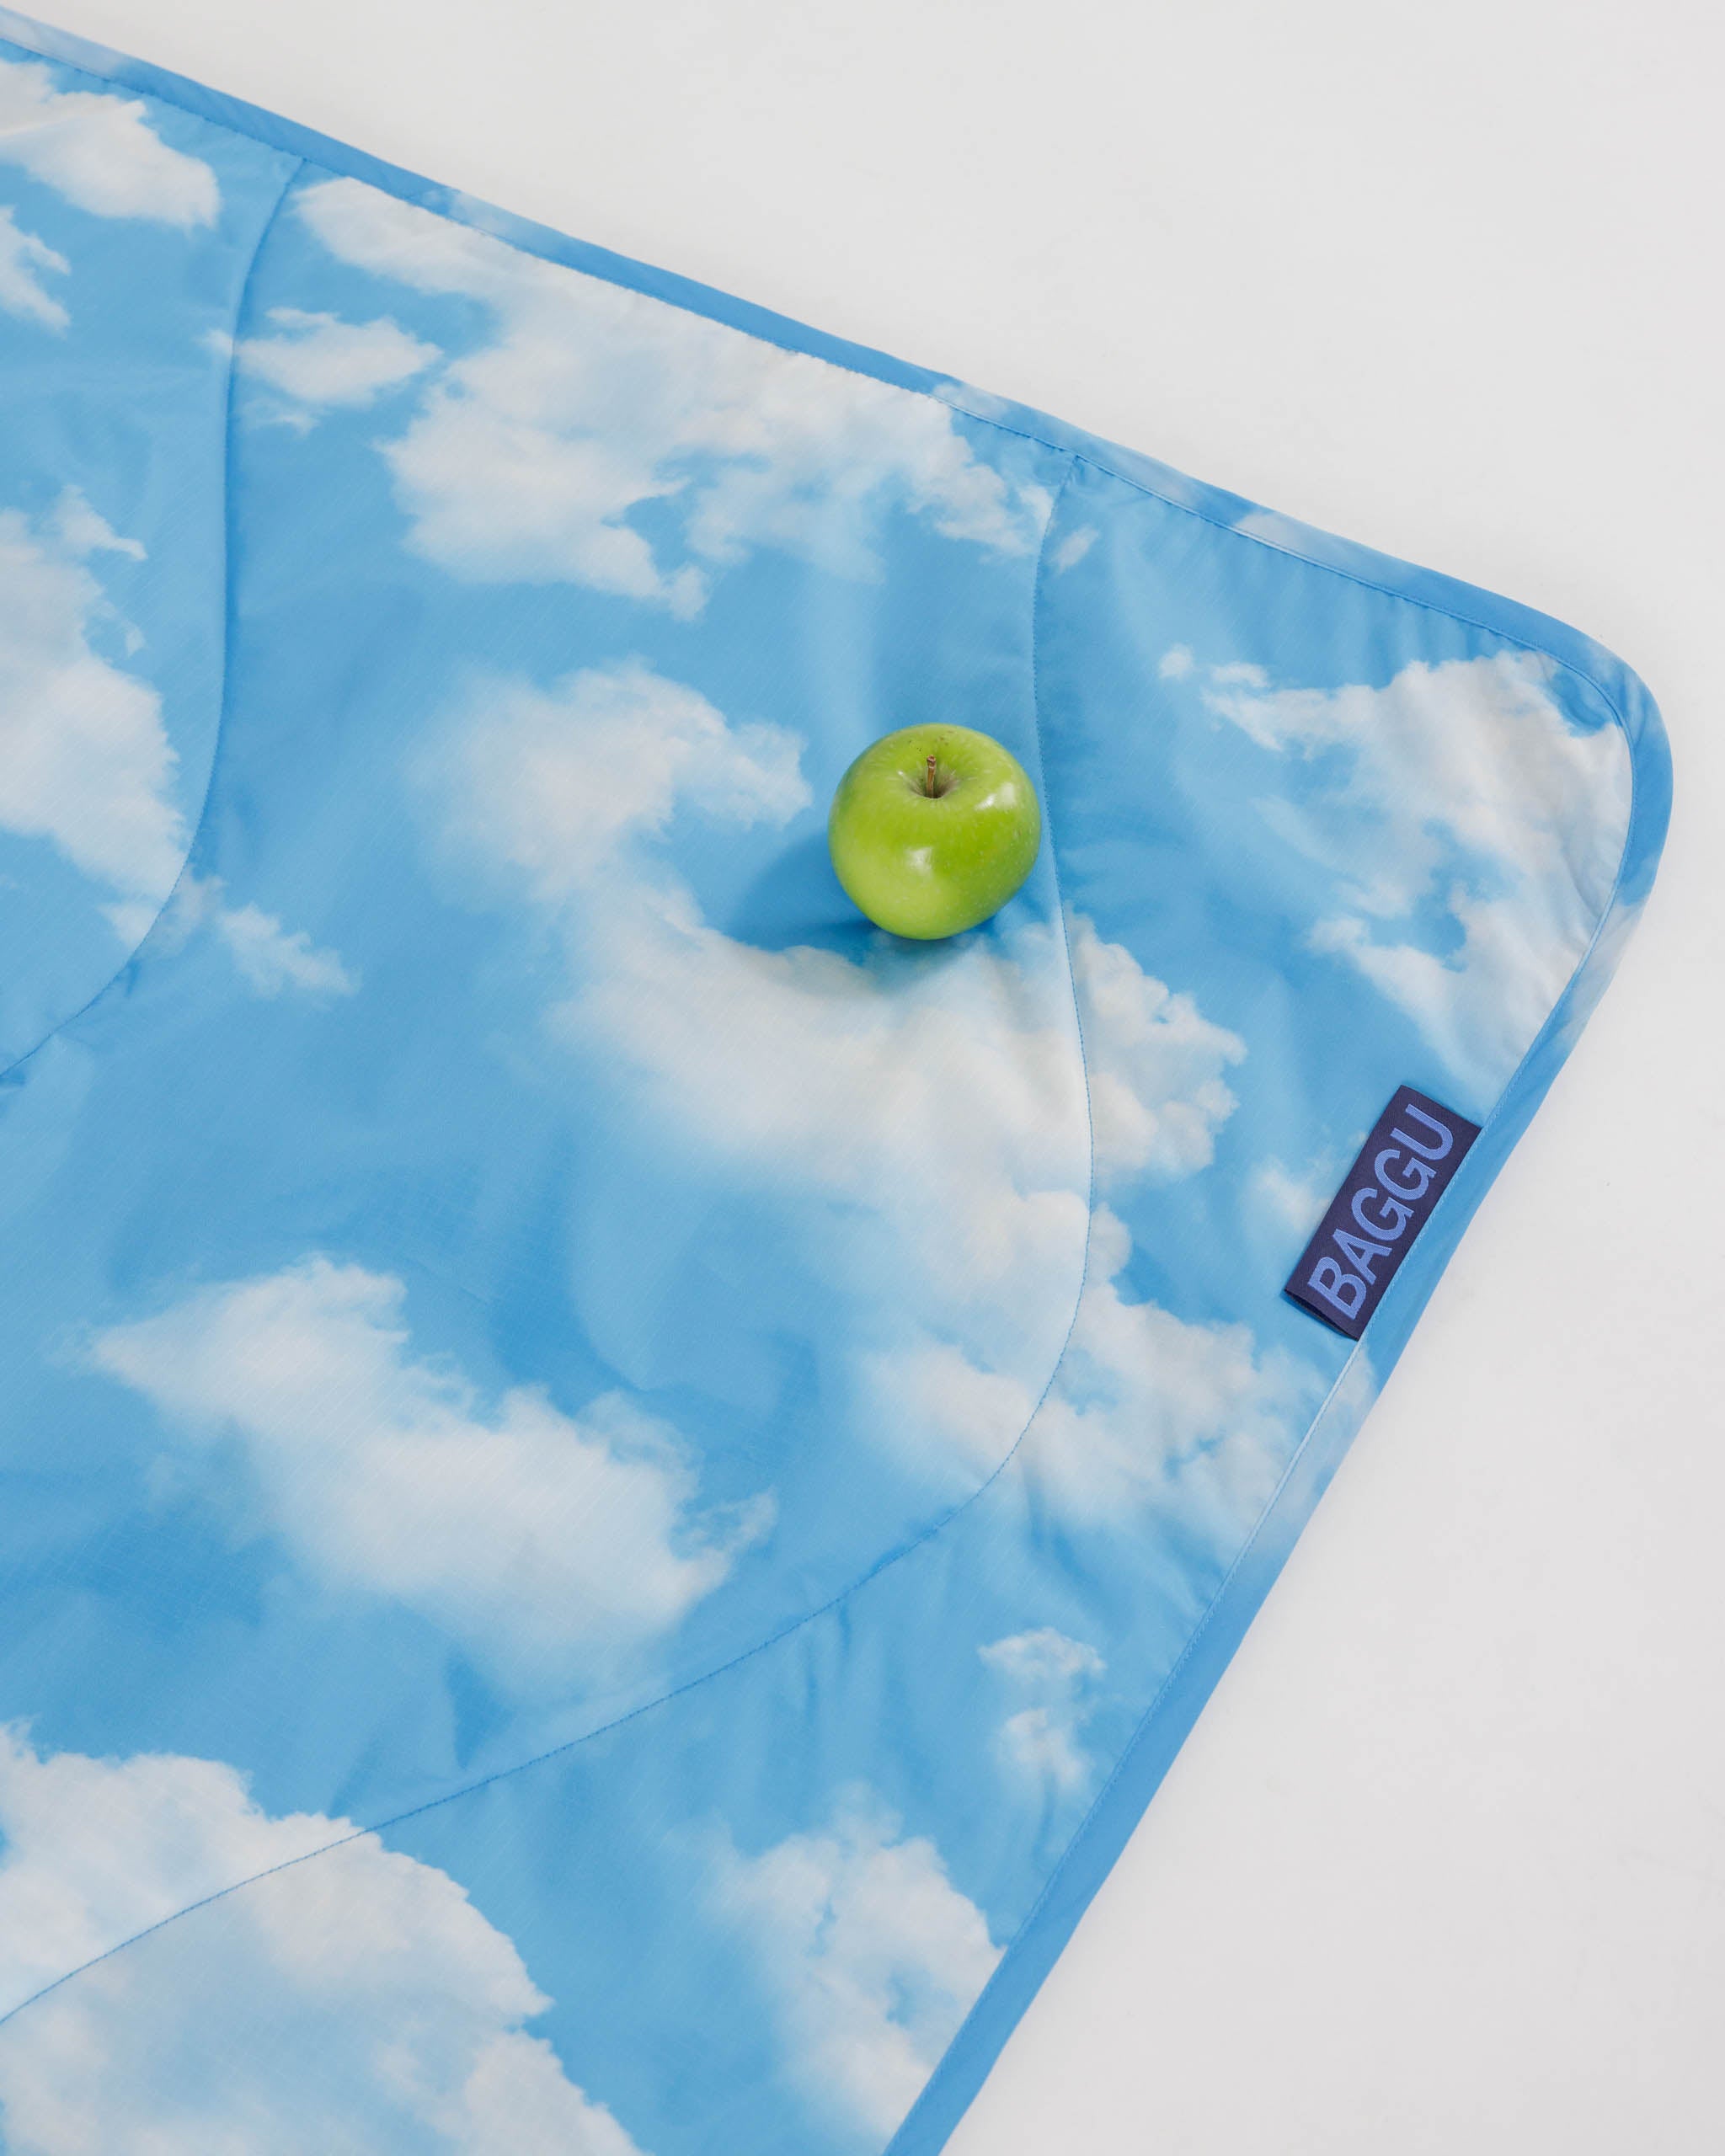 baggu-picnic-blanket-in-clouds-lying-flat-with-a-green-apple-on-top-corner